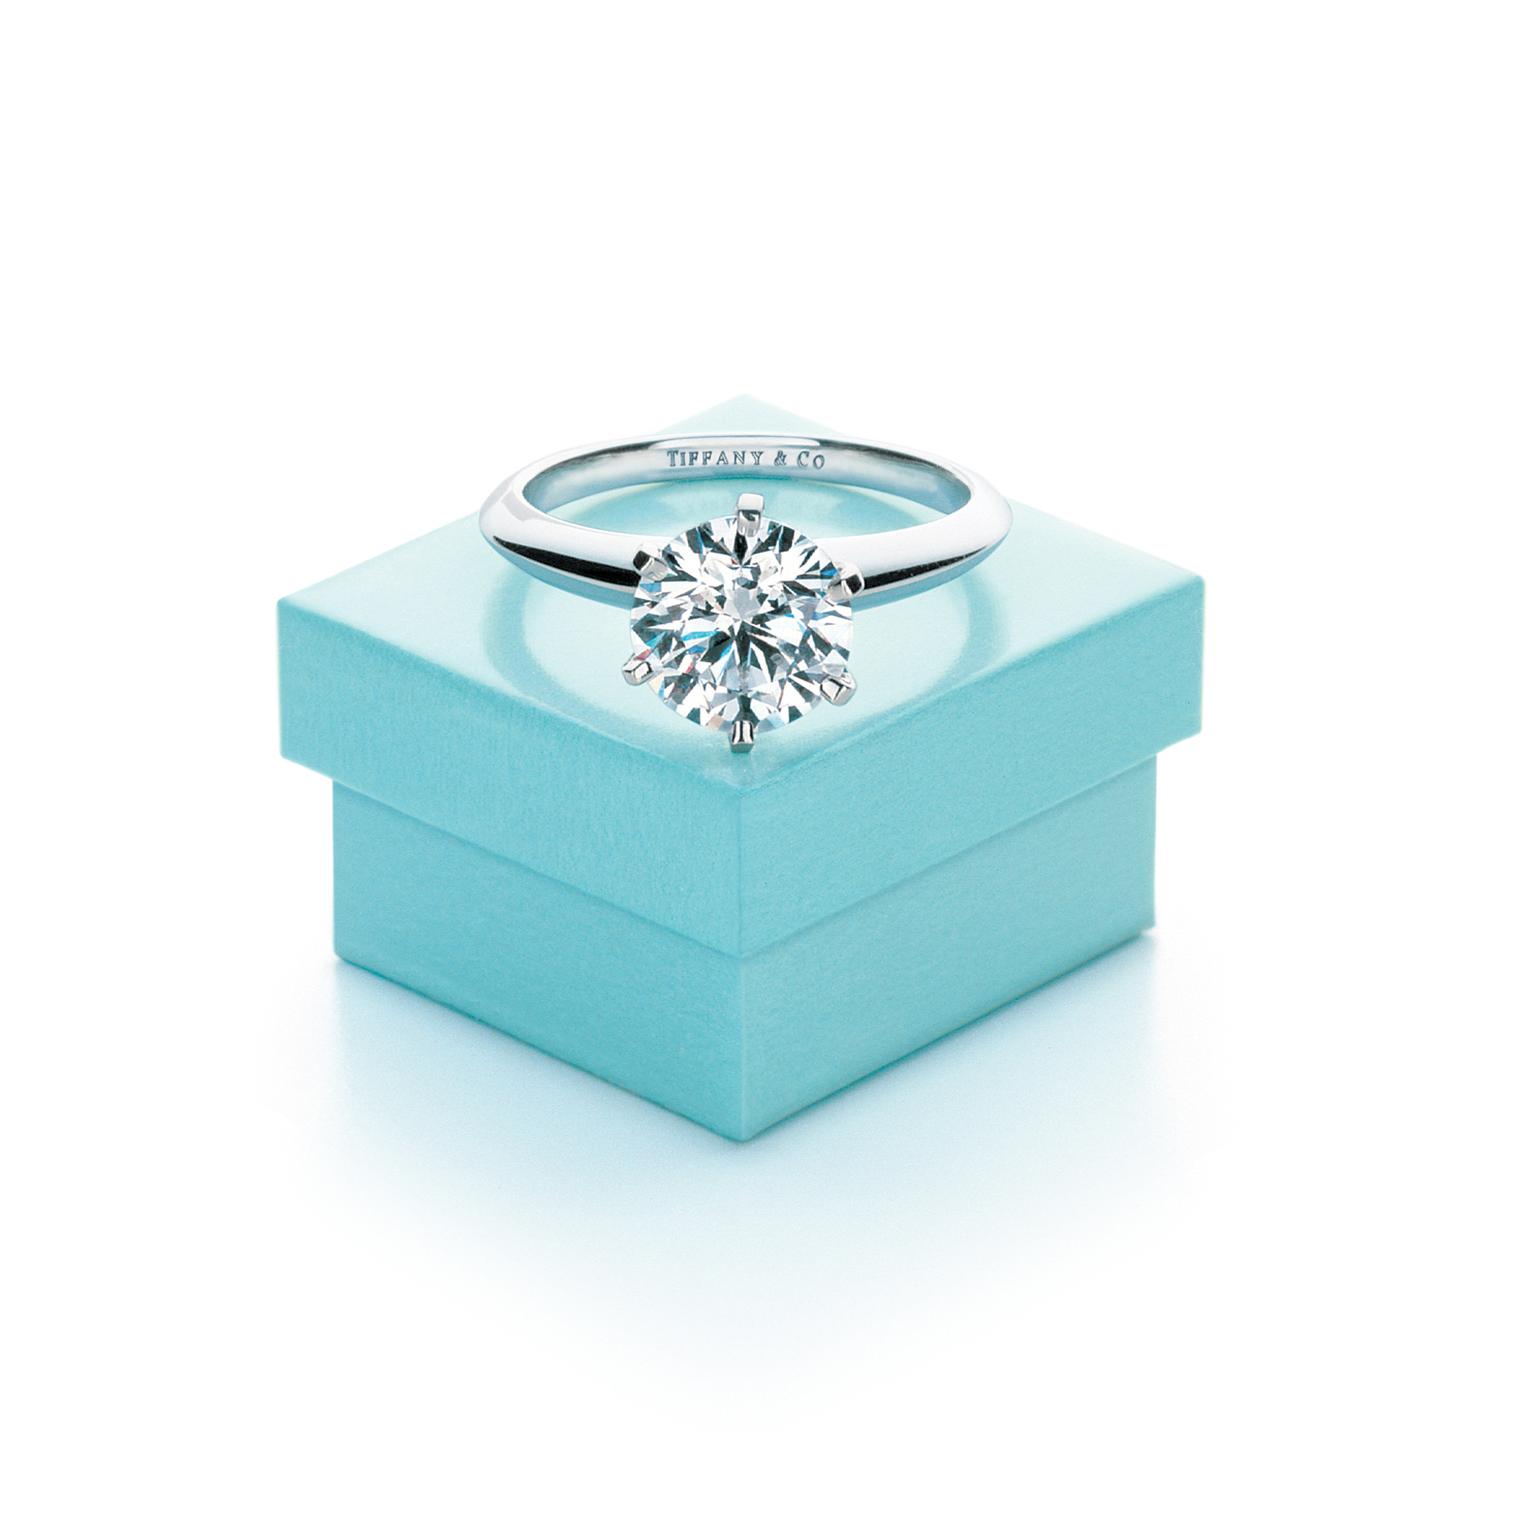 The Tiffany setting and blue box